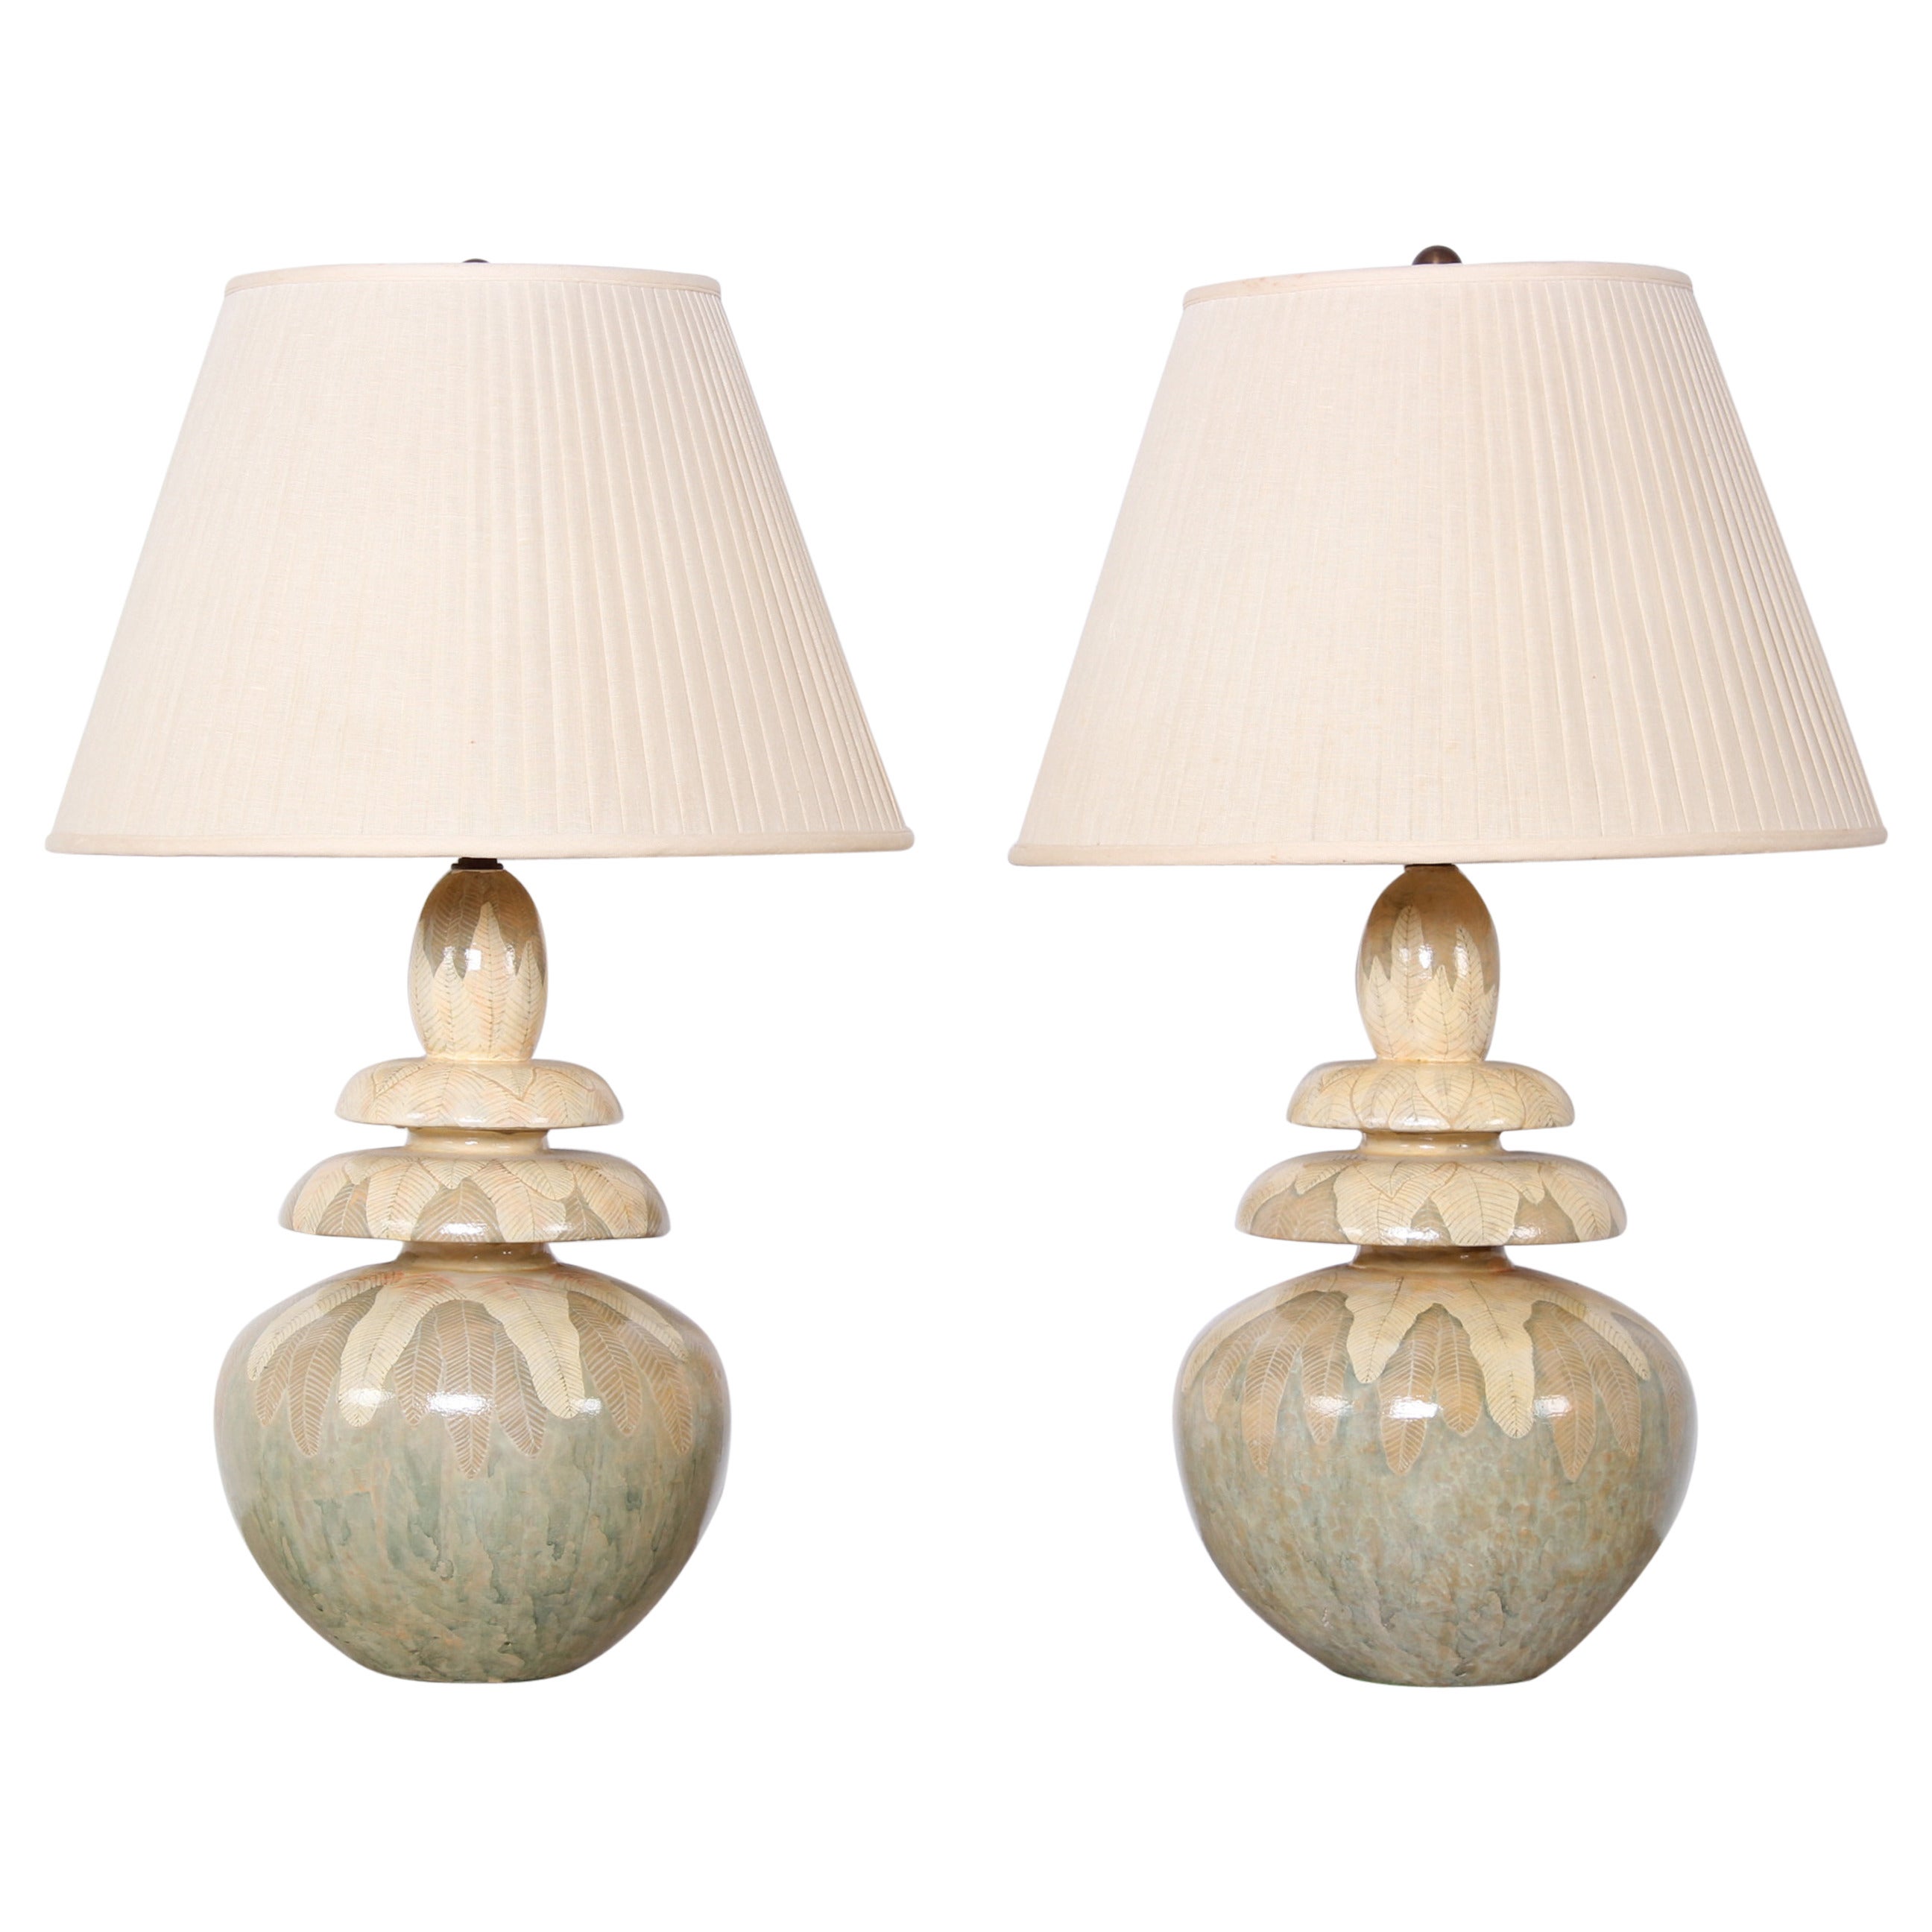 Pair of Hand Painted Table Lamps by Parish-Hadley